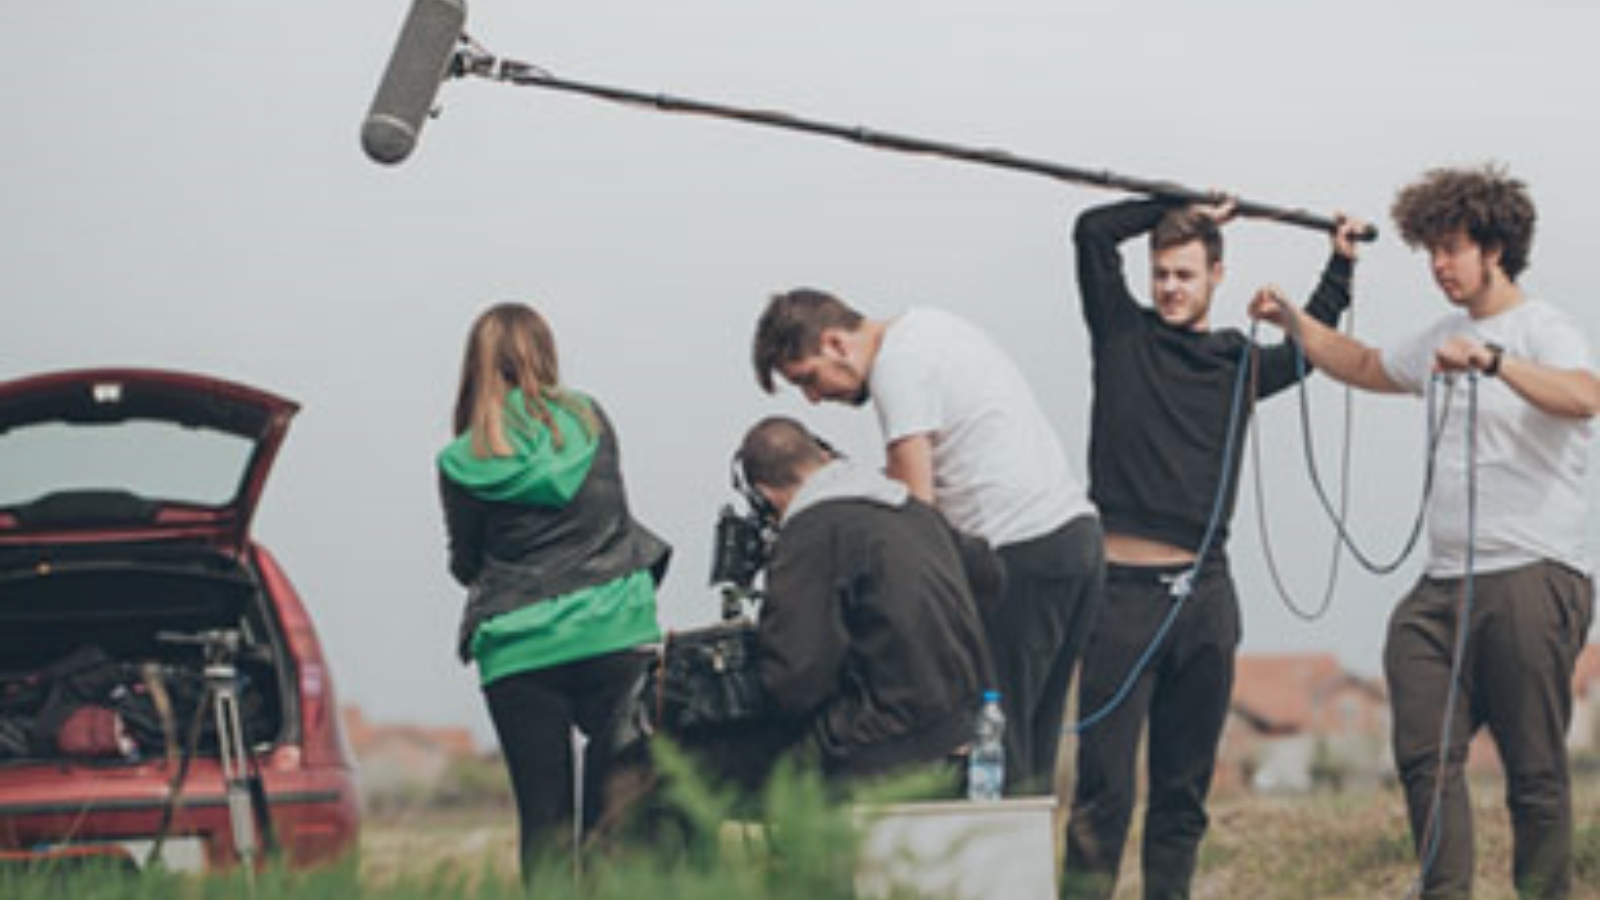 The image shows a film crew with equipment. From left there is the boot of a red car with equipment it in, a person wearing a black jacket and green hoodie with their back to the camera, a man siting holding a camera and another man also looking at the camera to his right. Then a man wearing black trousers and jumper is holding a mic in the air and is next to another man holding the cables of this, wearing a white t-shirt and brown trousers. They are outdoors with grass in the foreground of the image and houses in the background